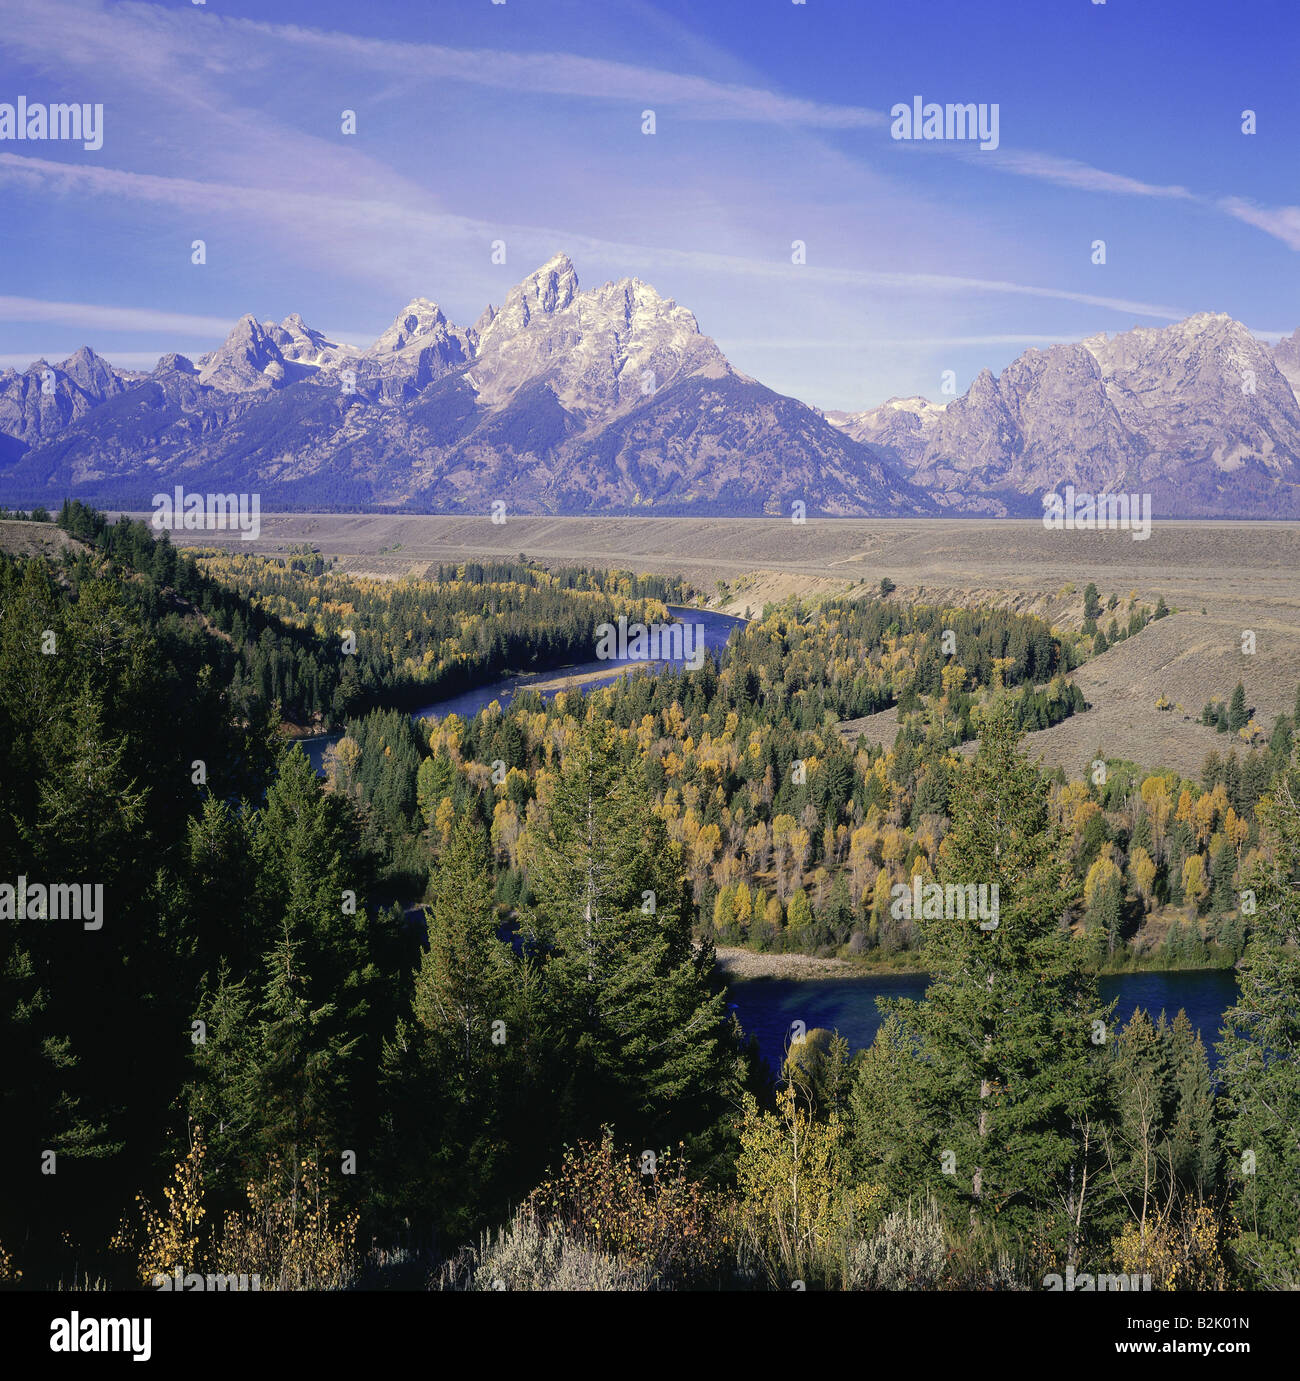 Geographie/Reisen, USA, Wyoming, Landschaften, Grand Teton National Park, Blick von der Snake River blicken auf Grand Teton Bergkette und Snake River, Additional-Rights - Clearance-Info - Not-Available Stockfoto